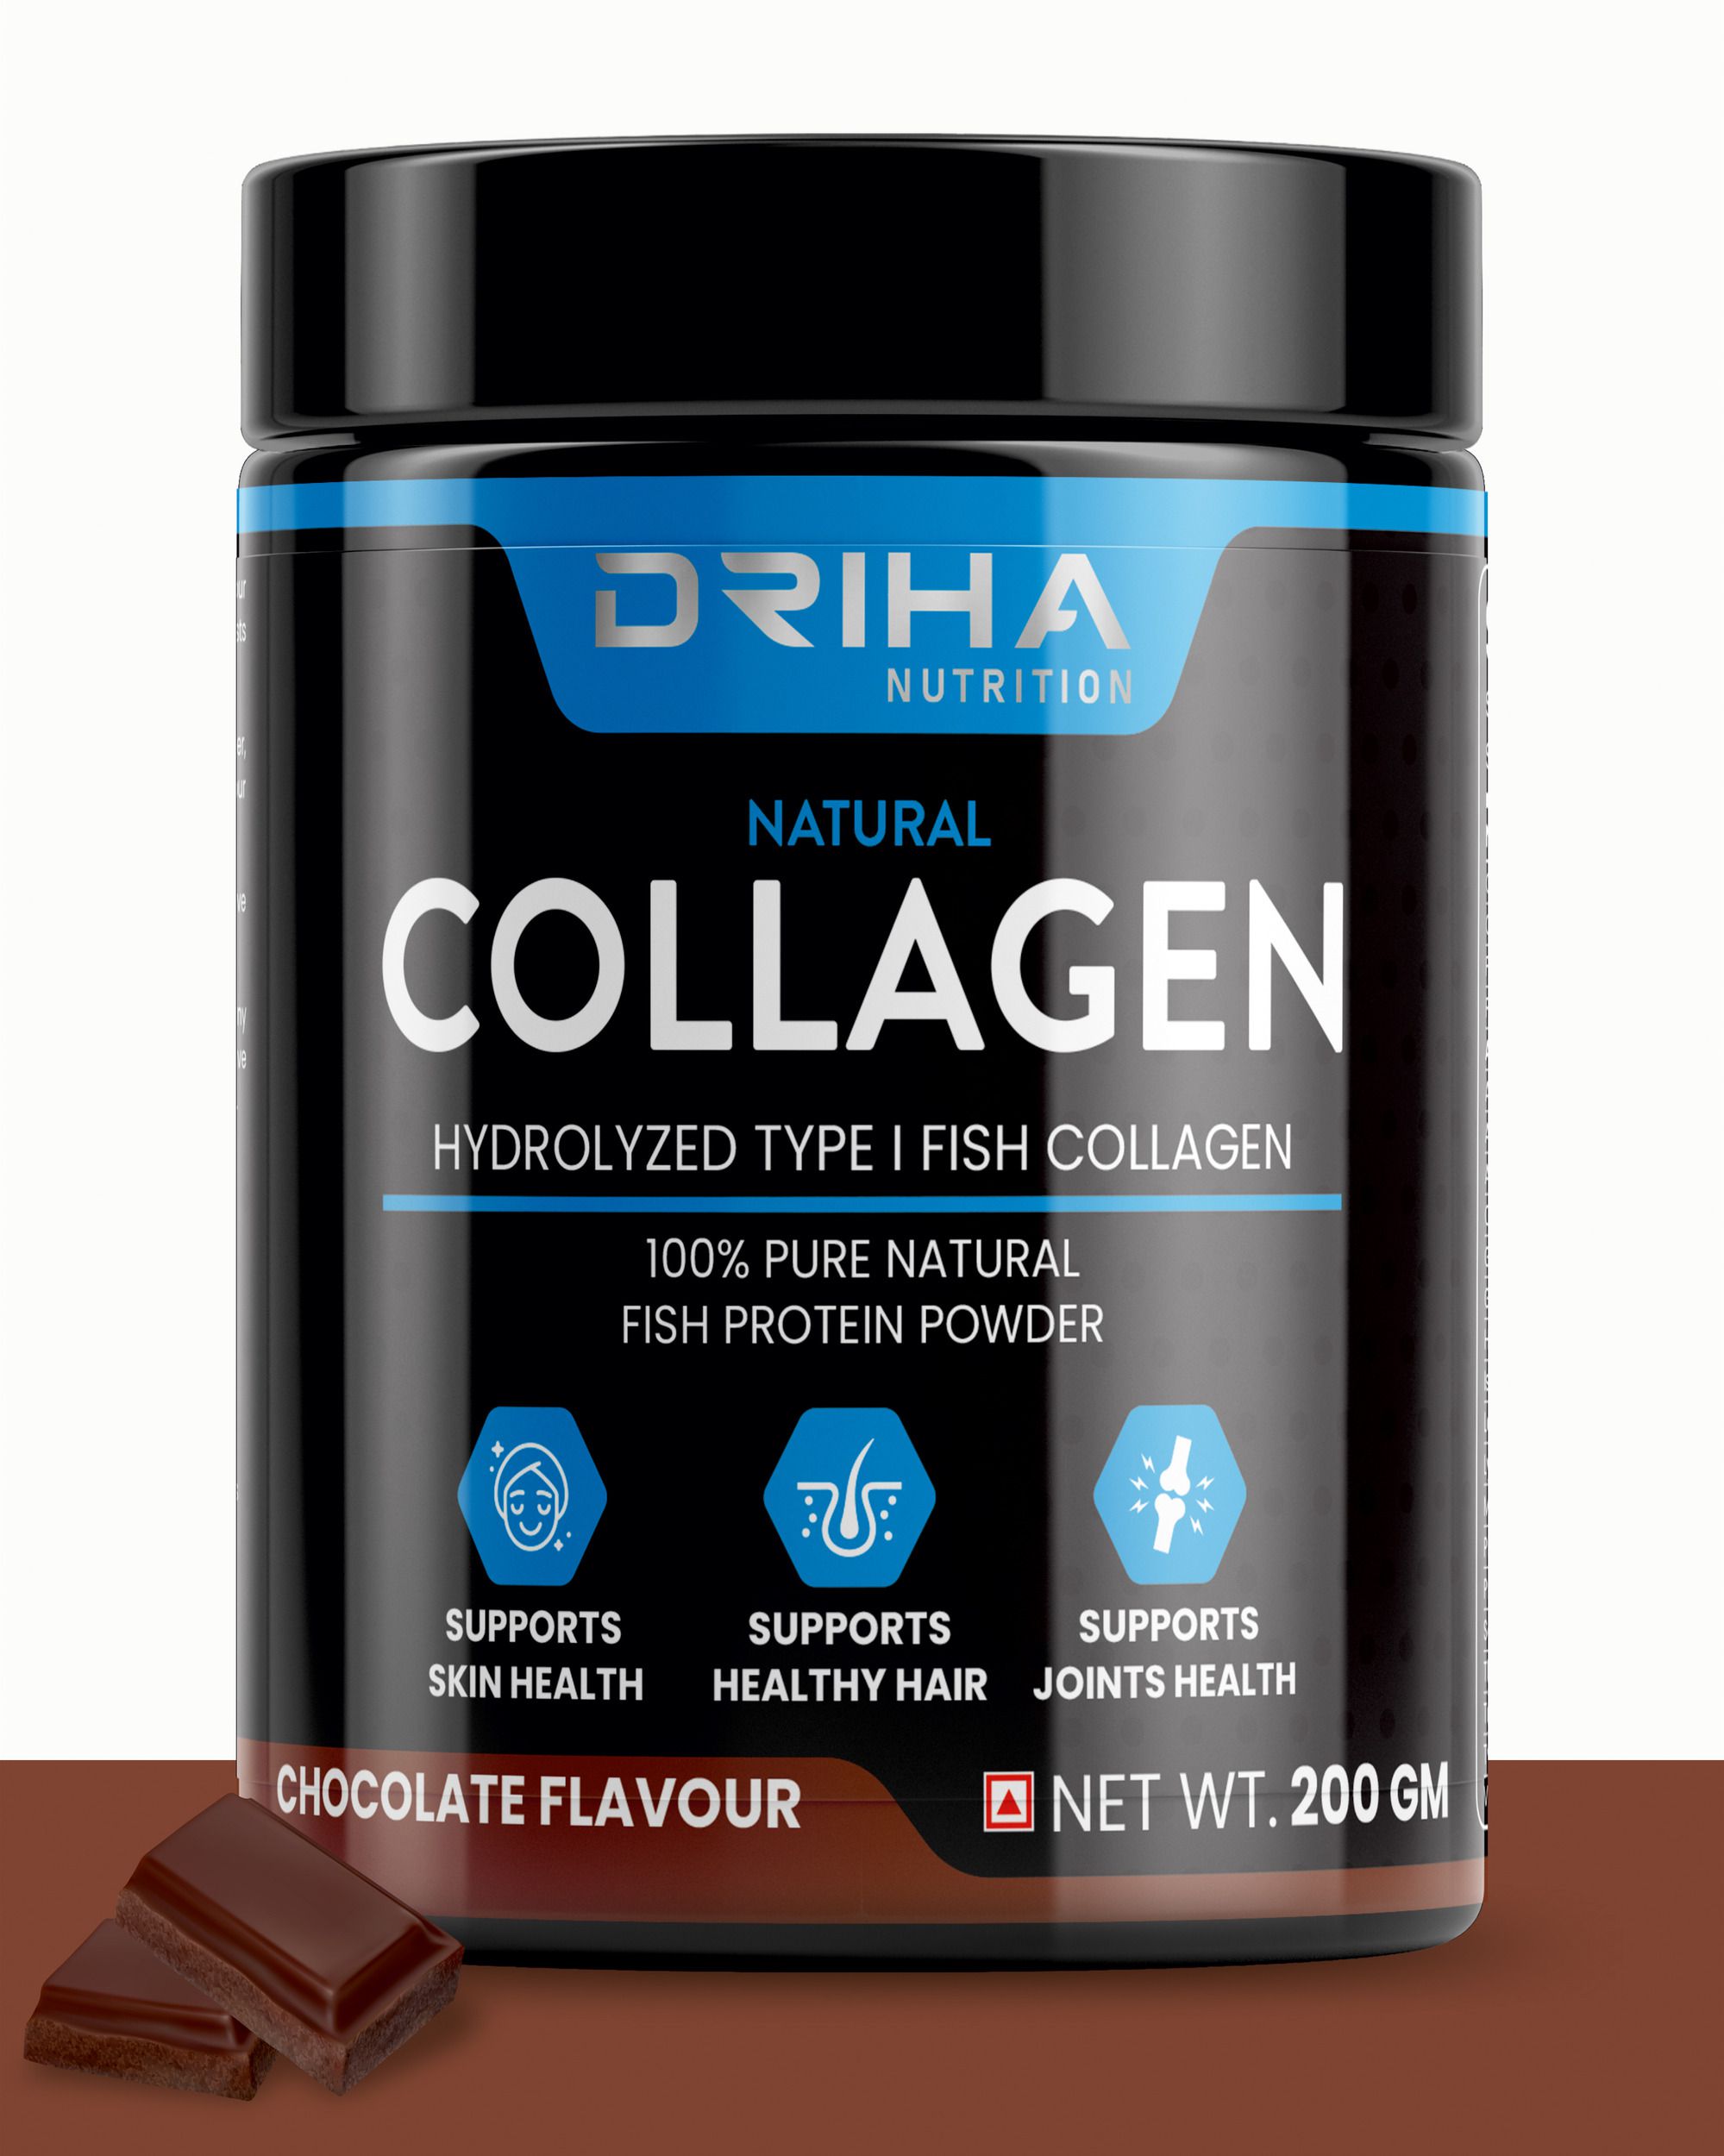     			Chocolate Flavour Natural Collagen Powder/Supplement For Men & Women | Pure & Natural Hydrolyzed Type Fish Protein Powder For Healthy Skin, Hair, Nails, Bone & Joint